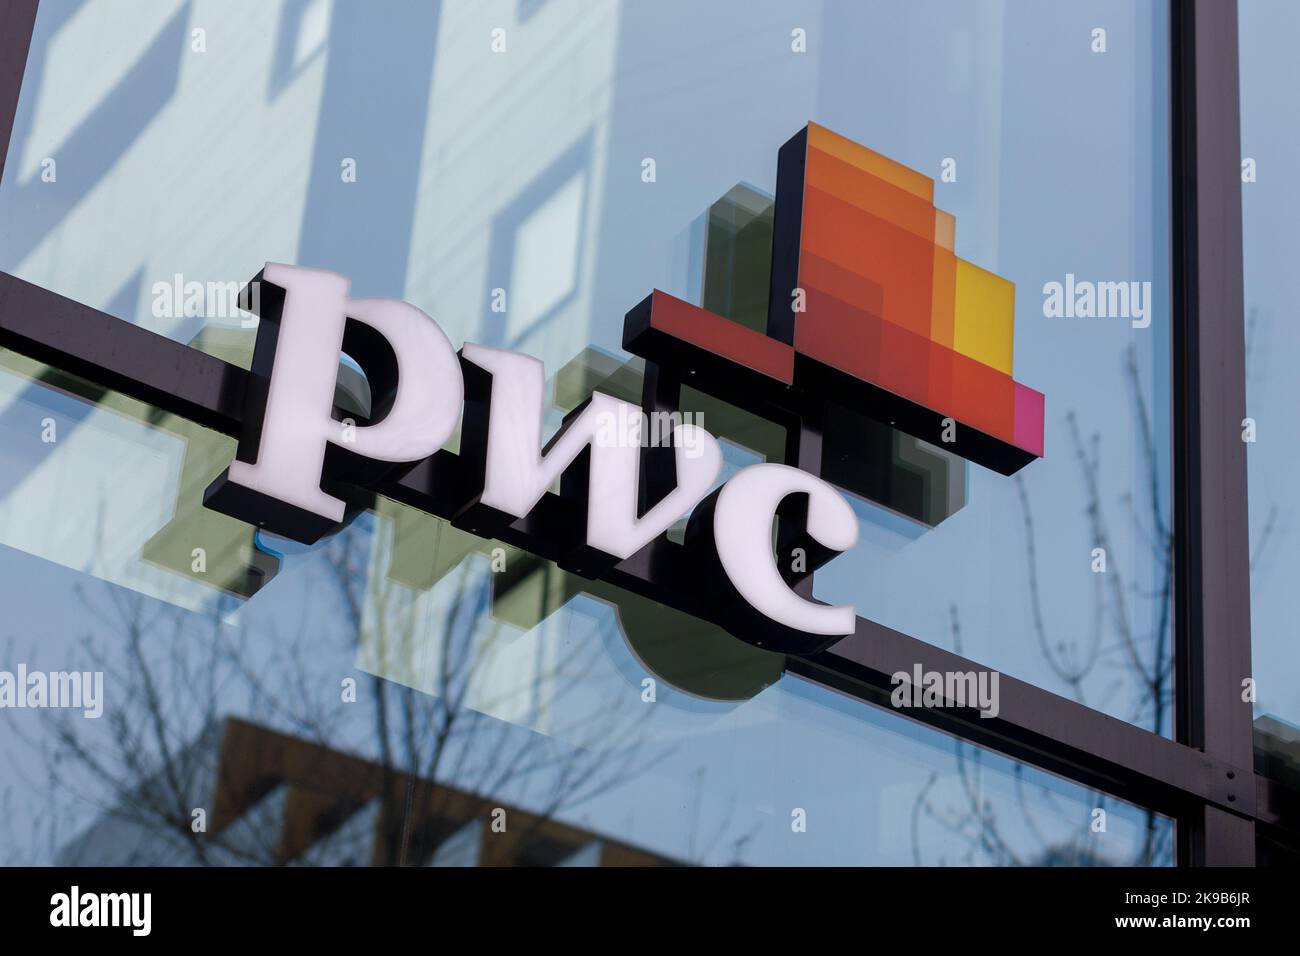 Oslo, Norway. May 02, 2022: PWC in the city of Oslo is an international network of professional services firms operating as companies under the PwC br Stock Photo